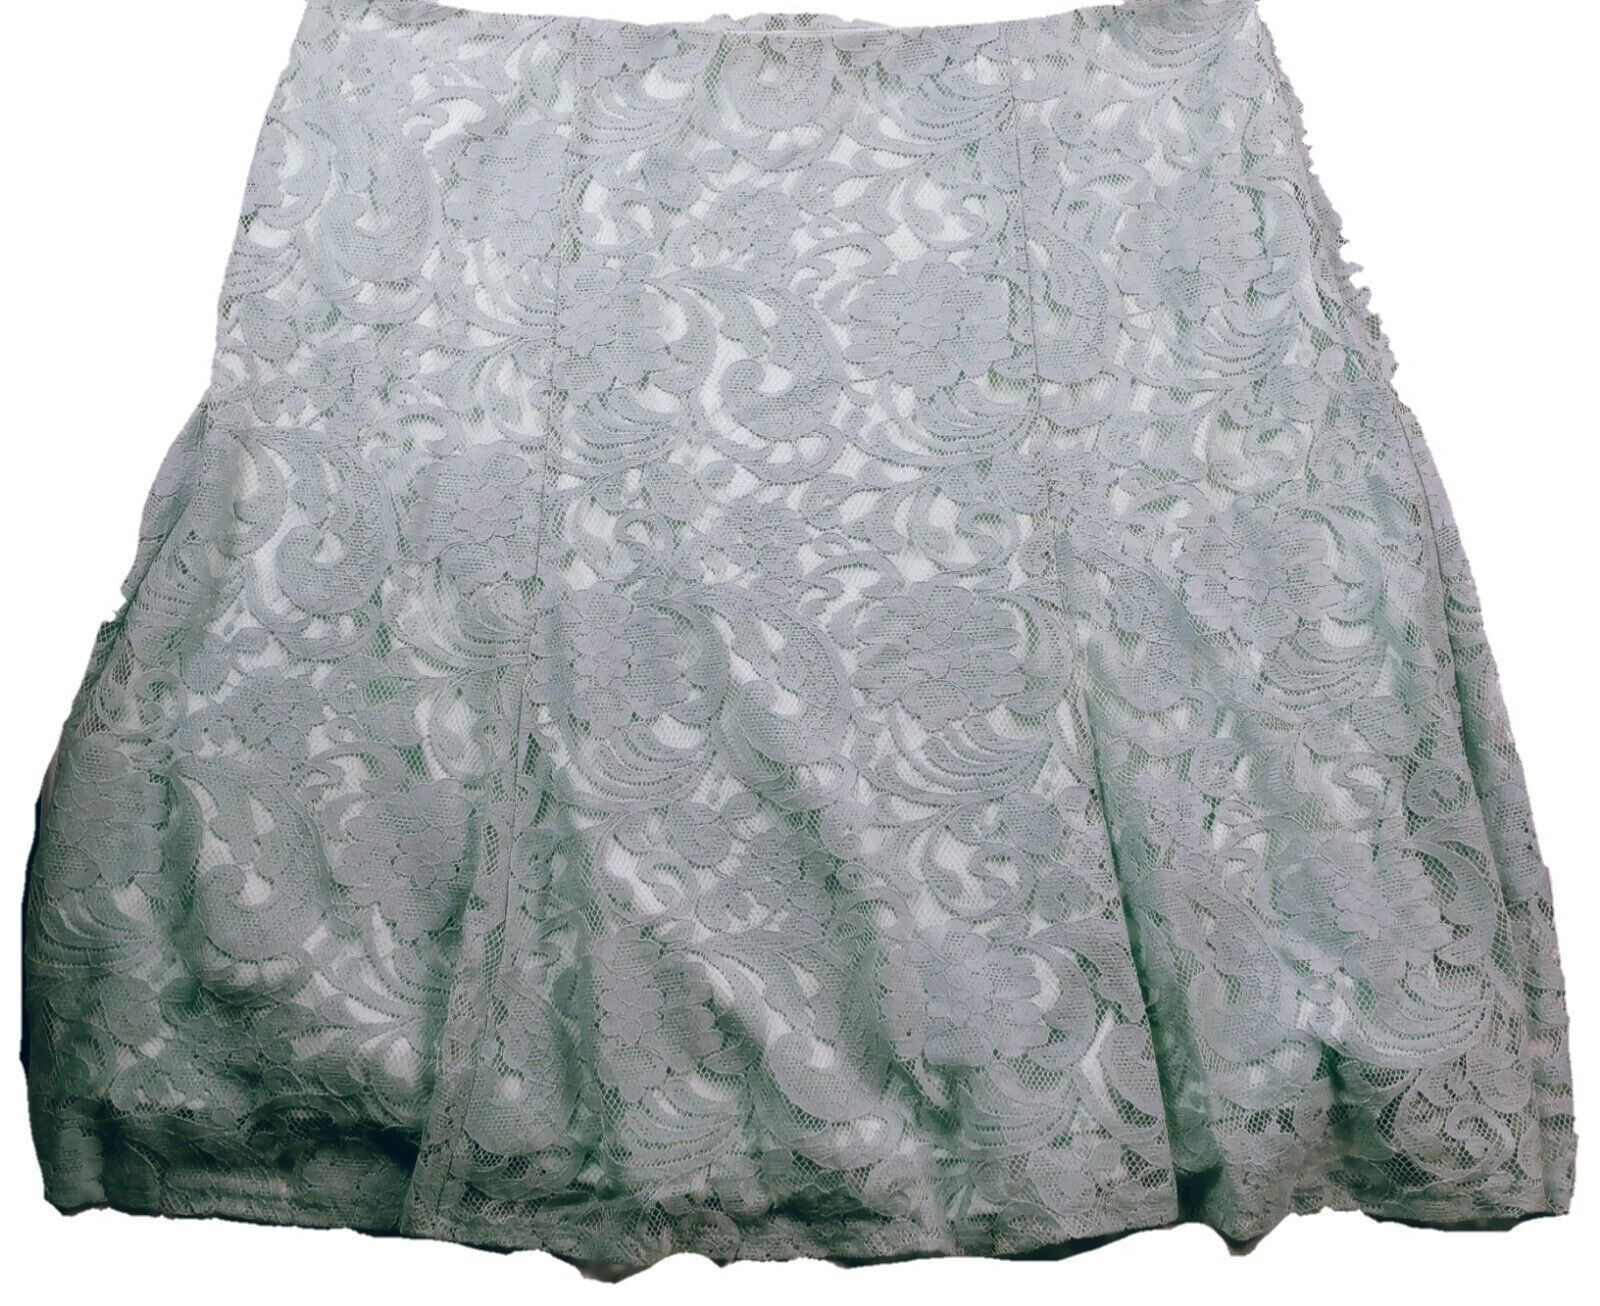 Primary image for NWT Roz & Ali Women's A Line Skirt Size 22 Blue Floral Lace Side Zip